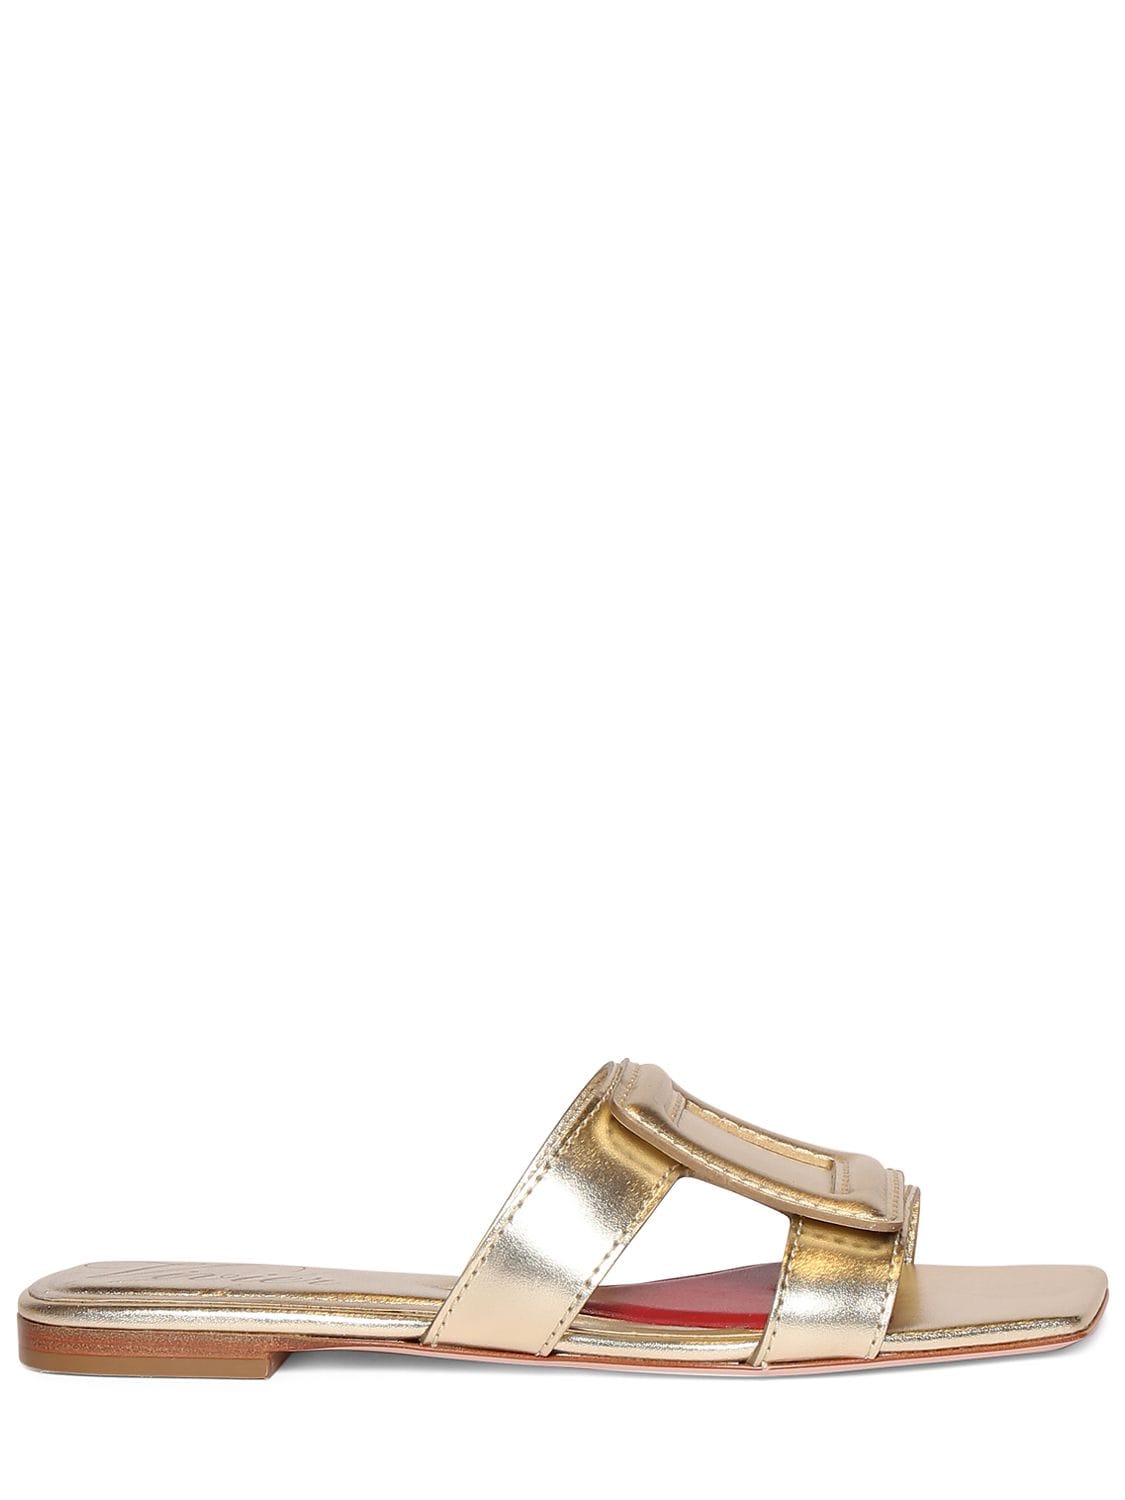 Roger Vivier 10mm Metallic Leather Flats Sandals In Gold